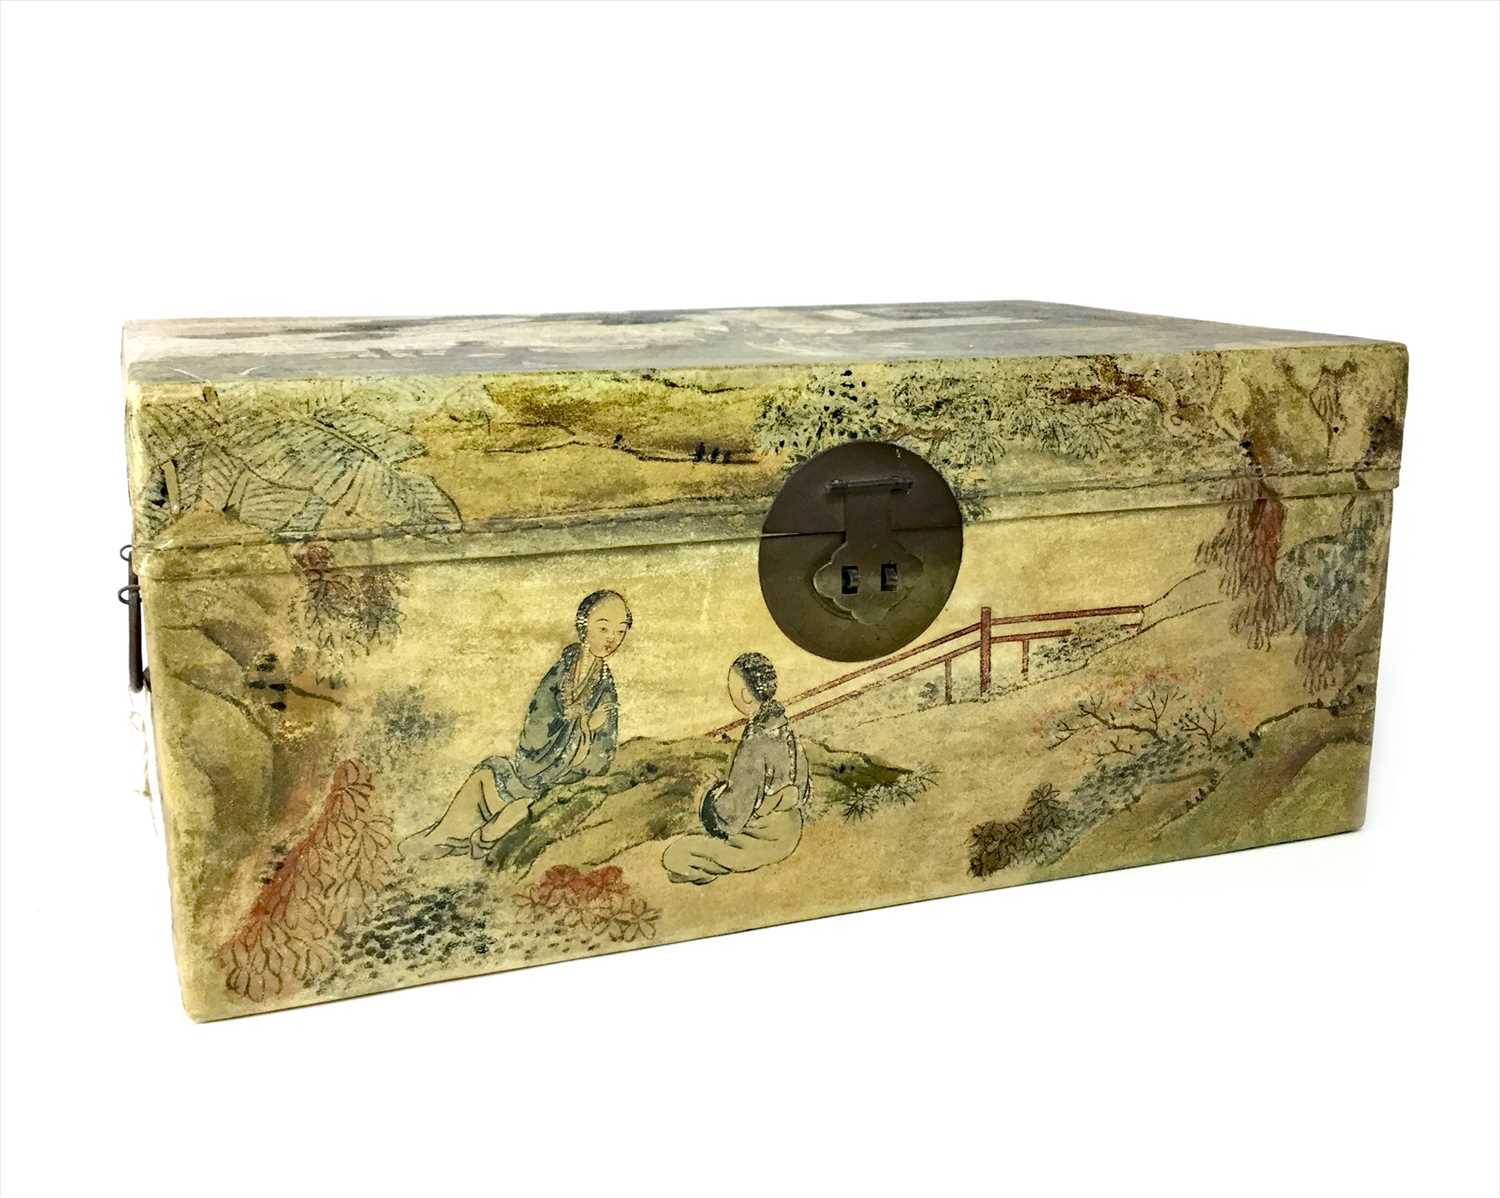 Lot 1150 - A LATE 19TH/EARLY 20TH CENTURY CHINESE PAINTED PIGSKIN BOX